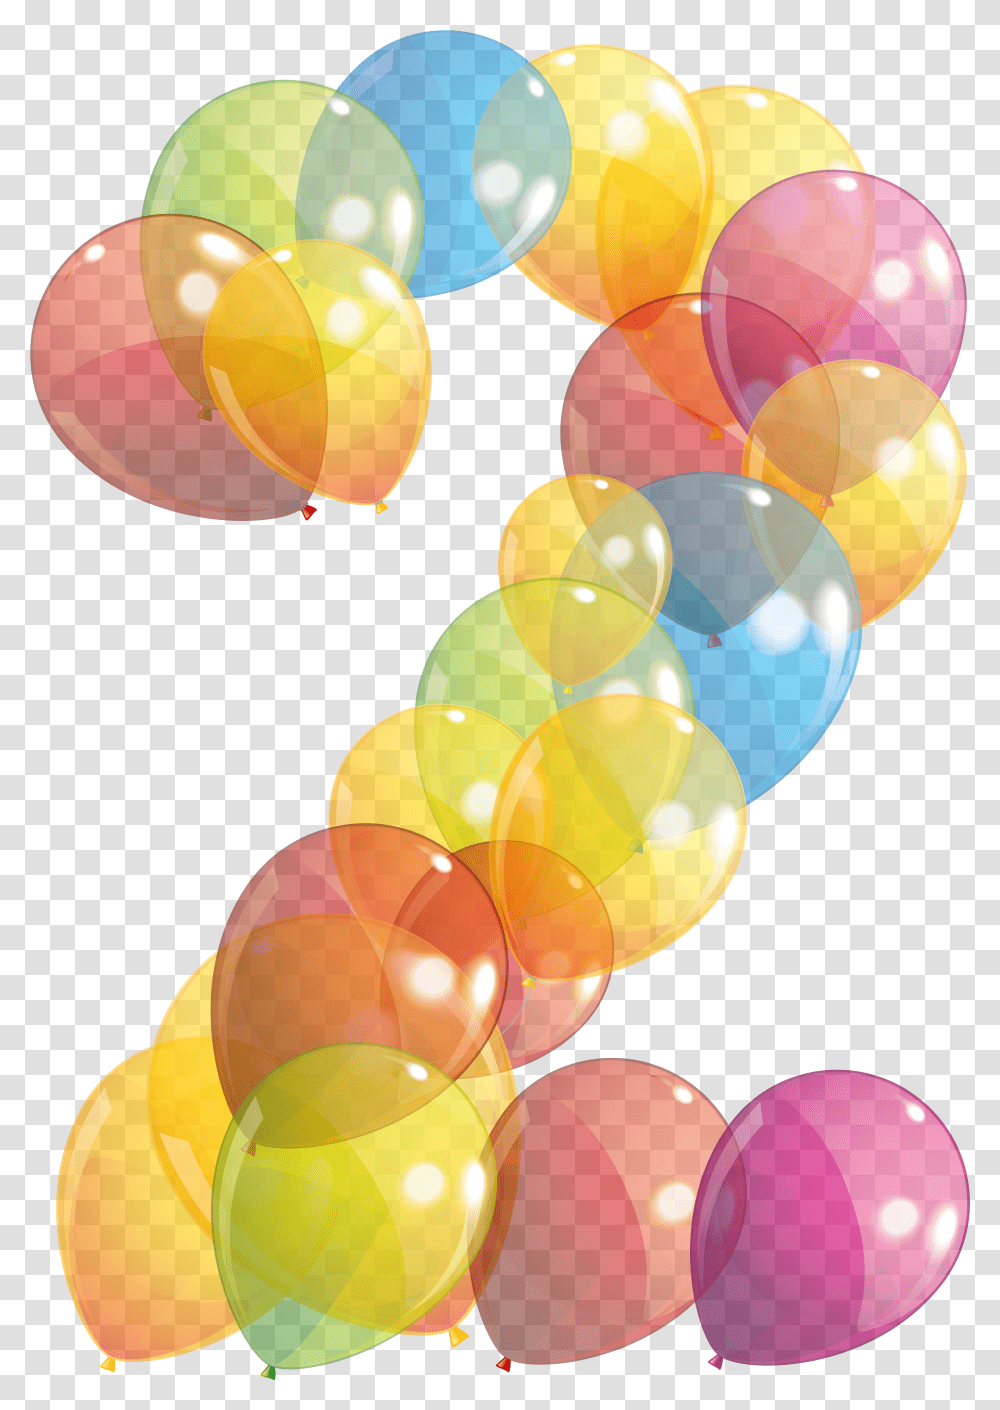 Two Number Of Balloons Clipart Image Transparent Png